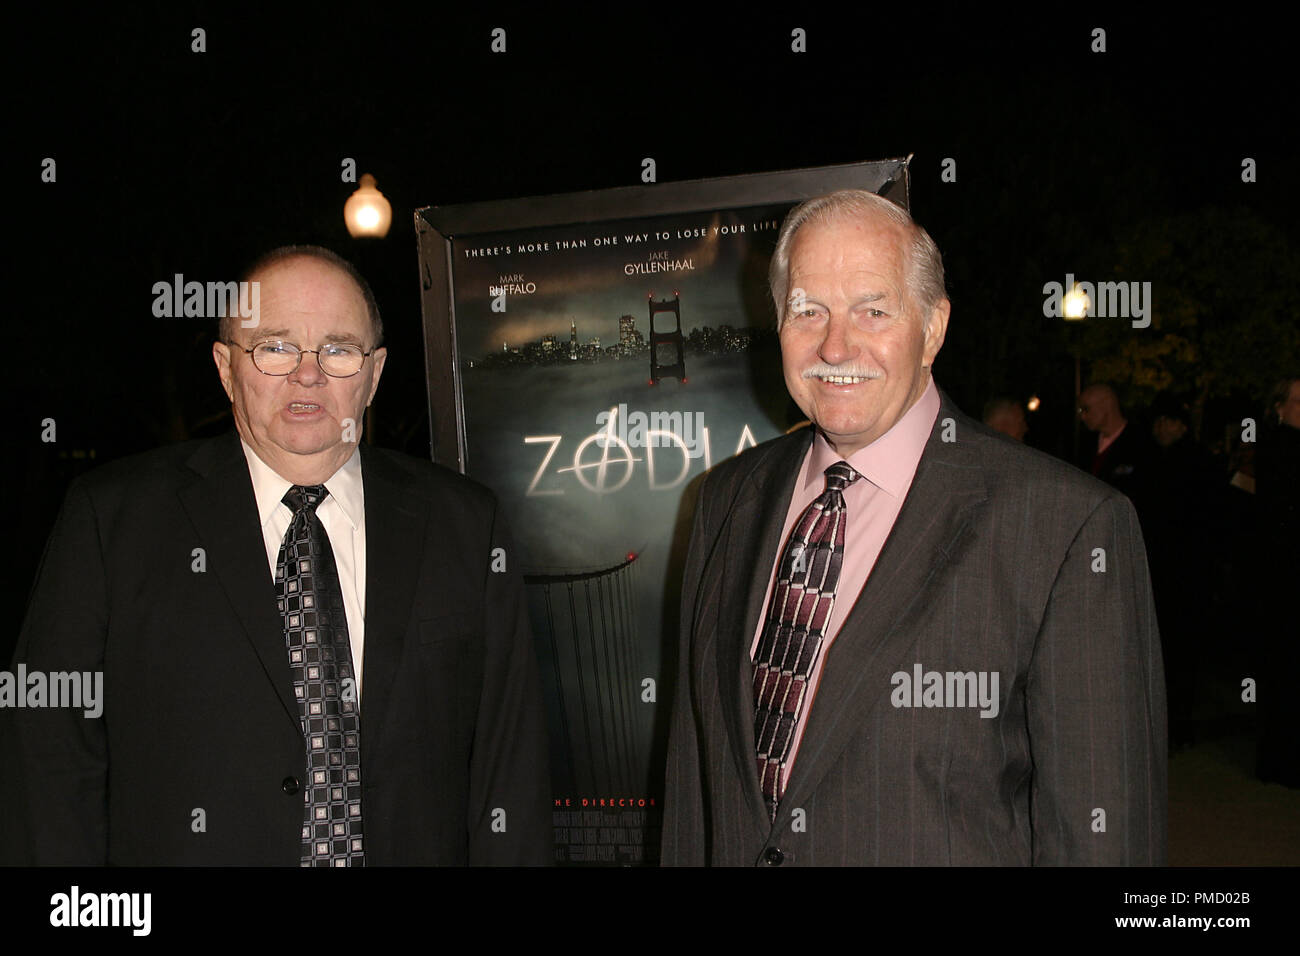 https://c8.alamy.com/comp/PMD02B/zodiac-premiere-george-bower-ken-narlow-3-1-2007-paramount-theatre-hollywood-ca-paramount-photo-by-joseph-martinez-all-rights-reserved-file-reference-22939-0008plx-for-editorial-use-only-PMD02B.jpg